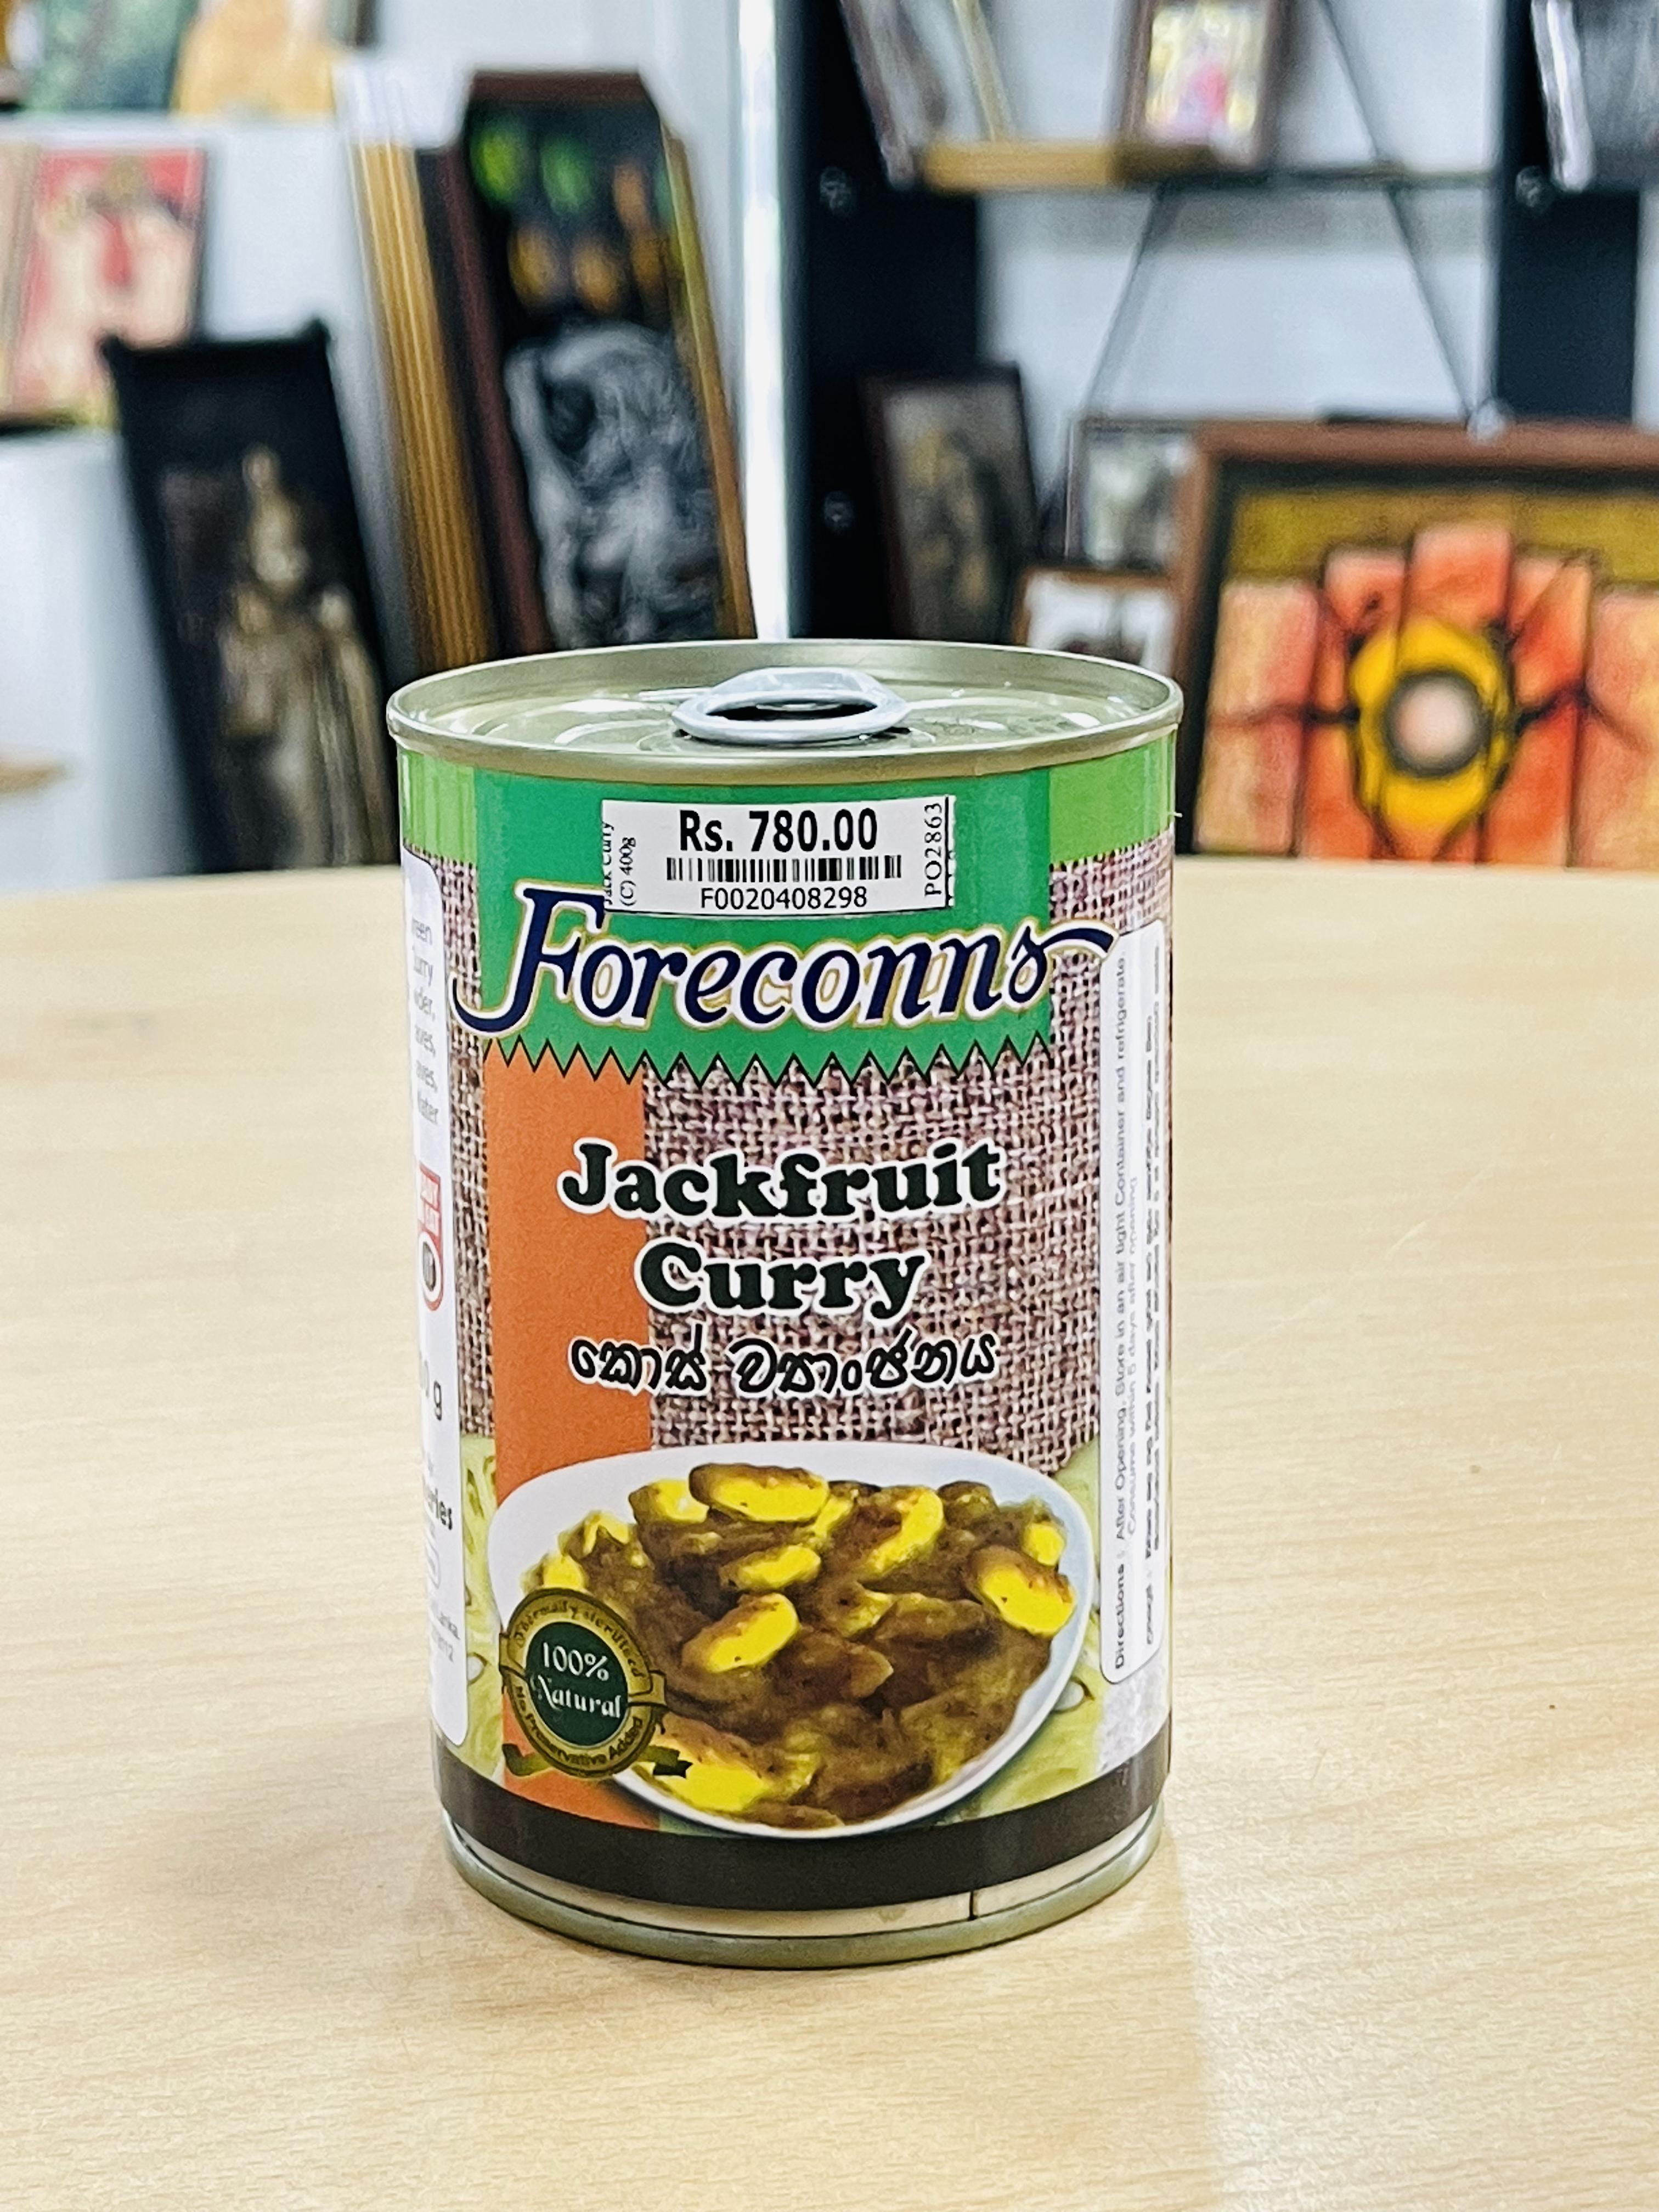 Foreconns Canned JackFruit Curry